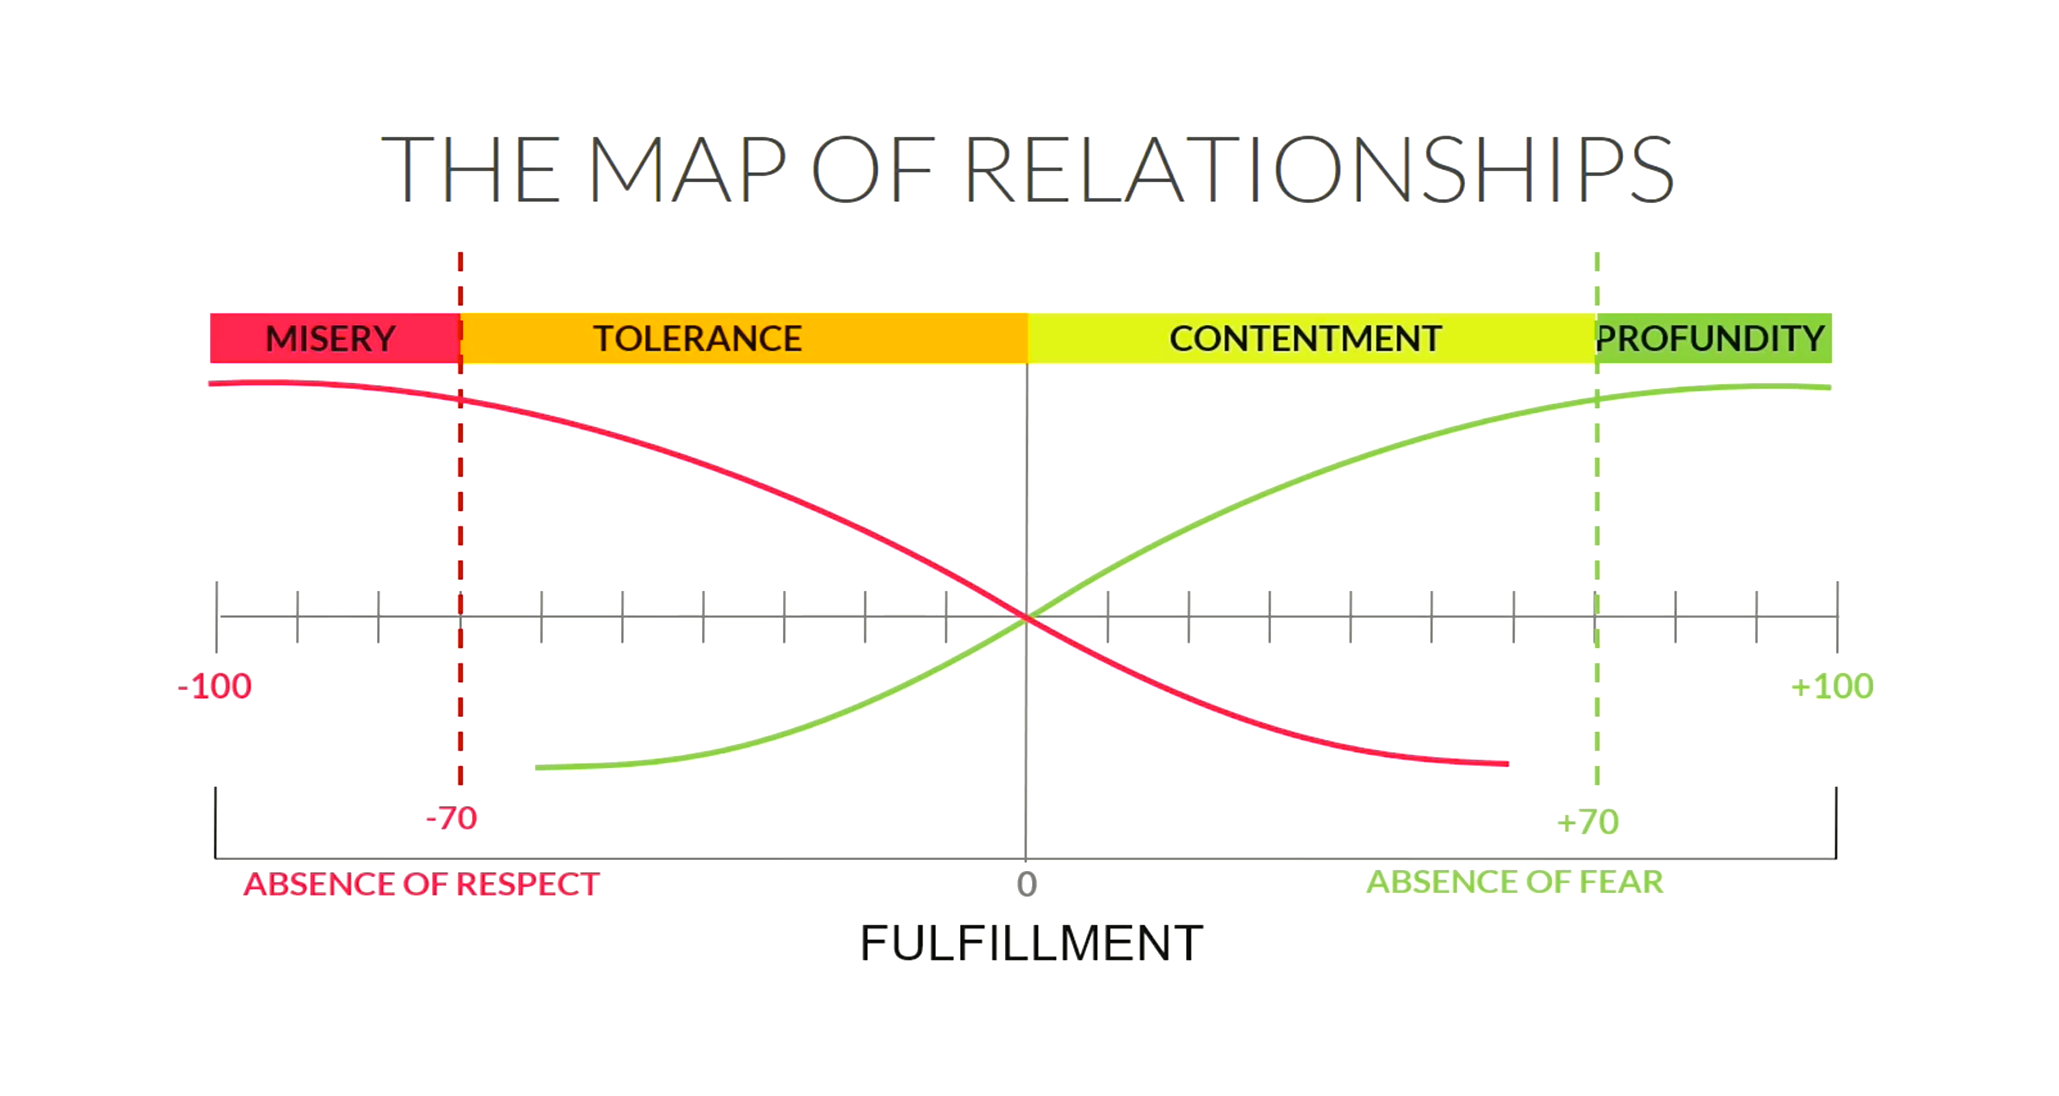 The map of relationships created by Rory Kilmartin